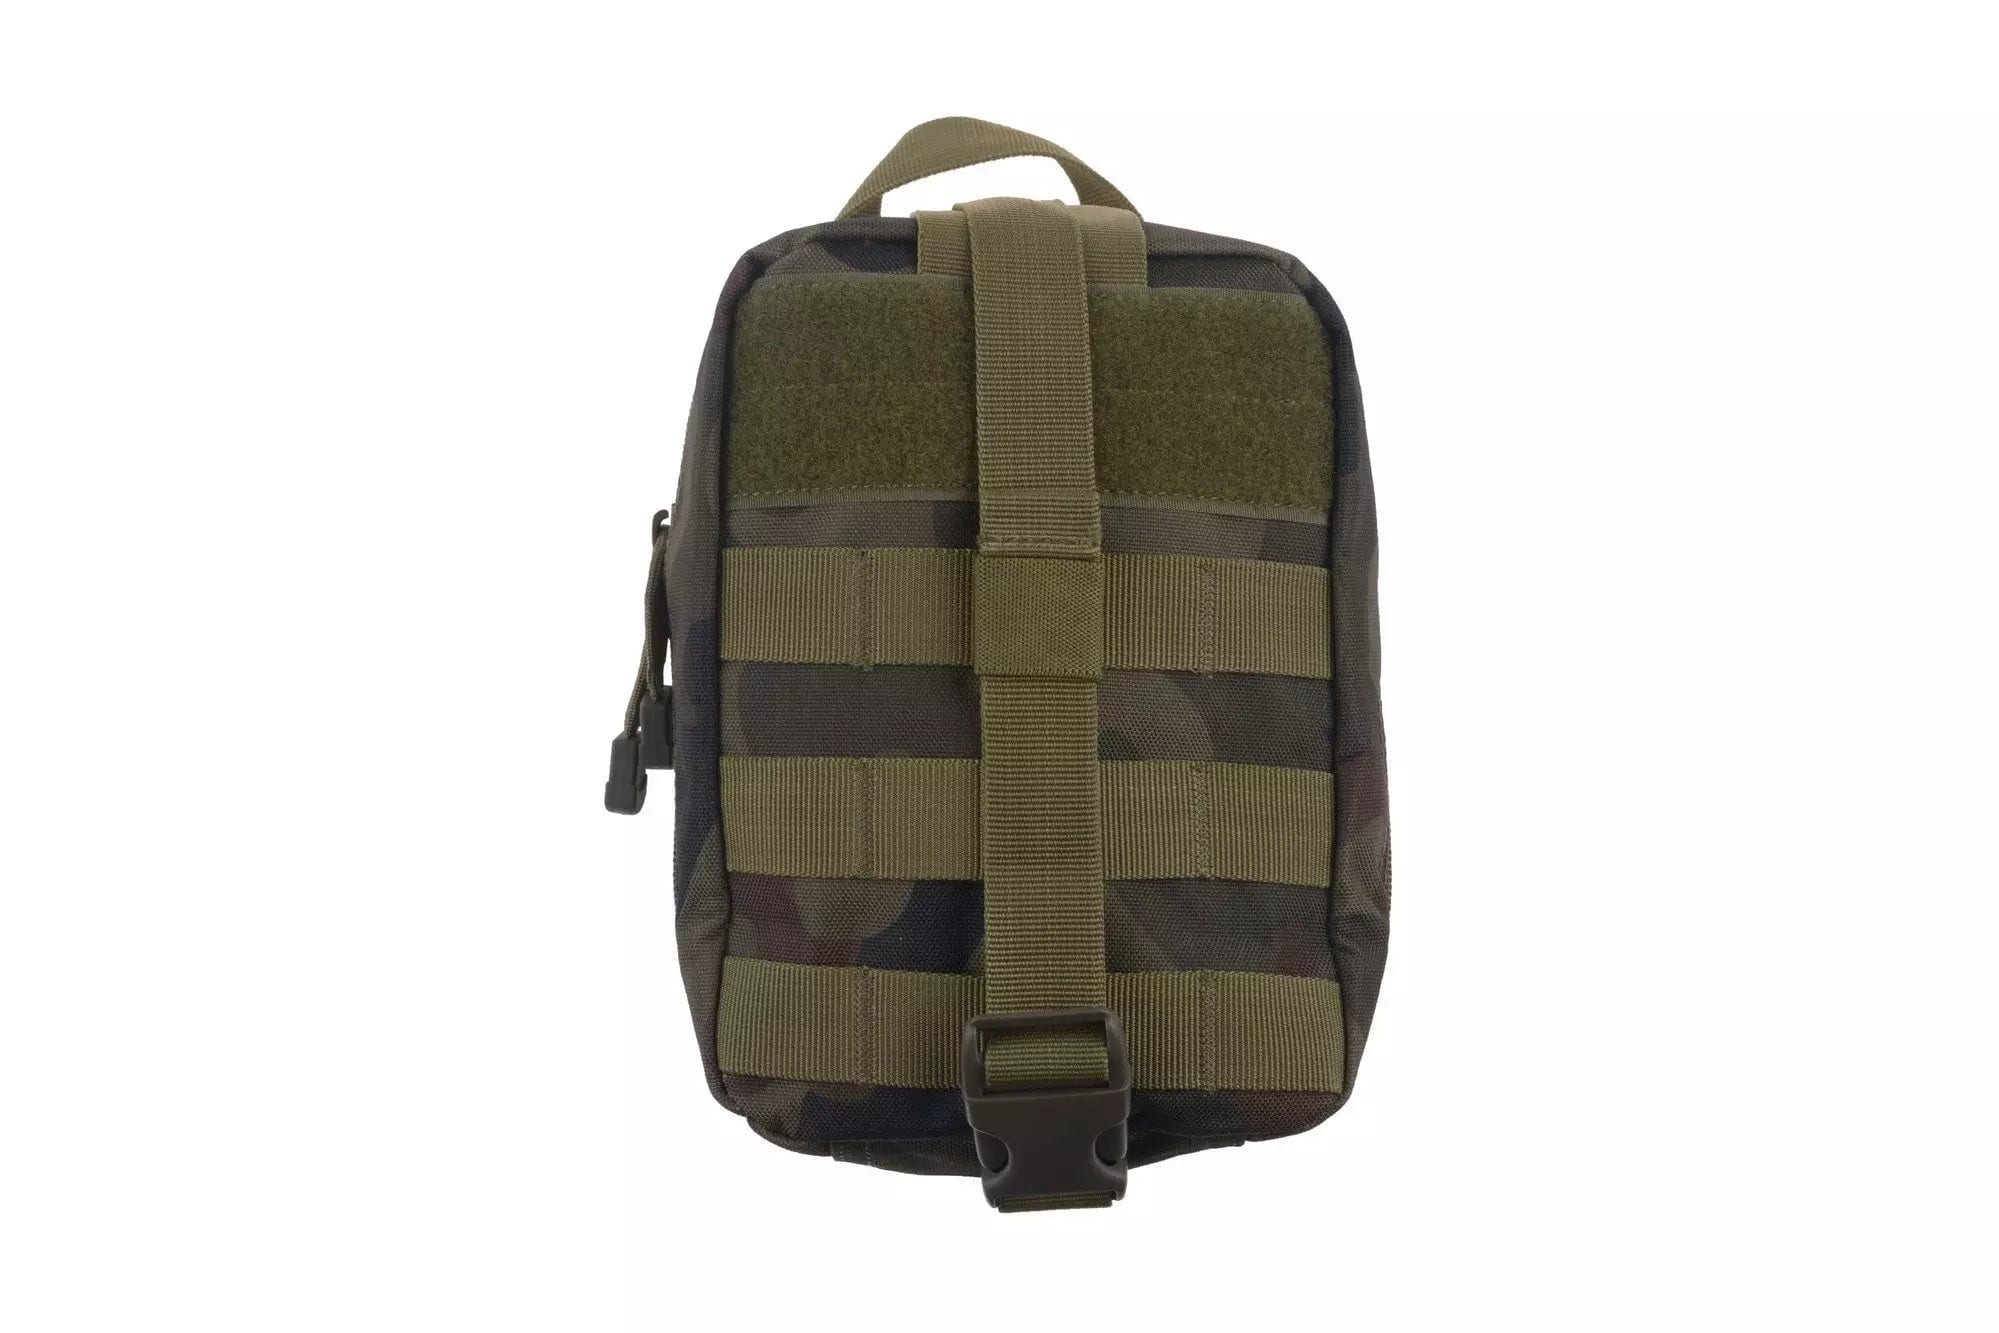 rip-off med kit pouch - wz. 93 woodland panther